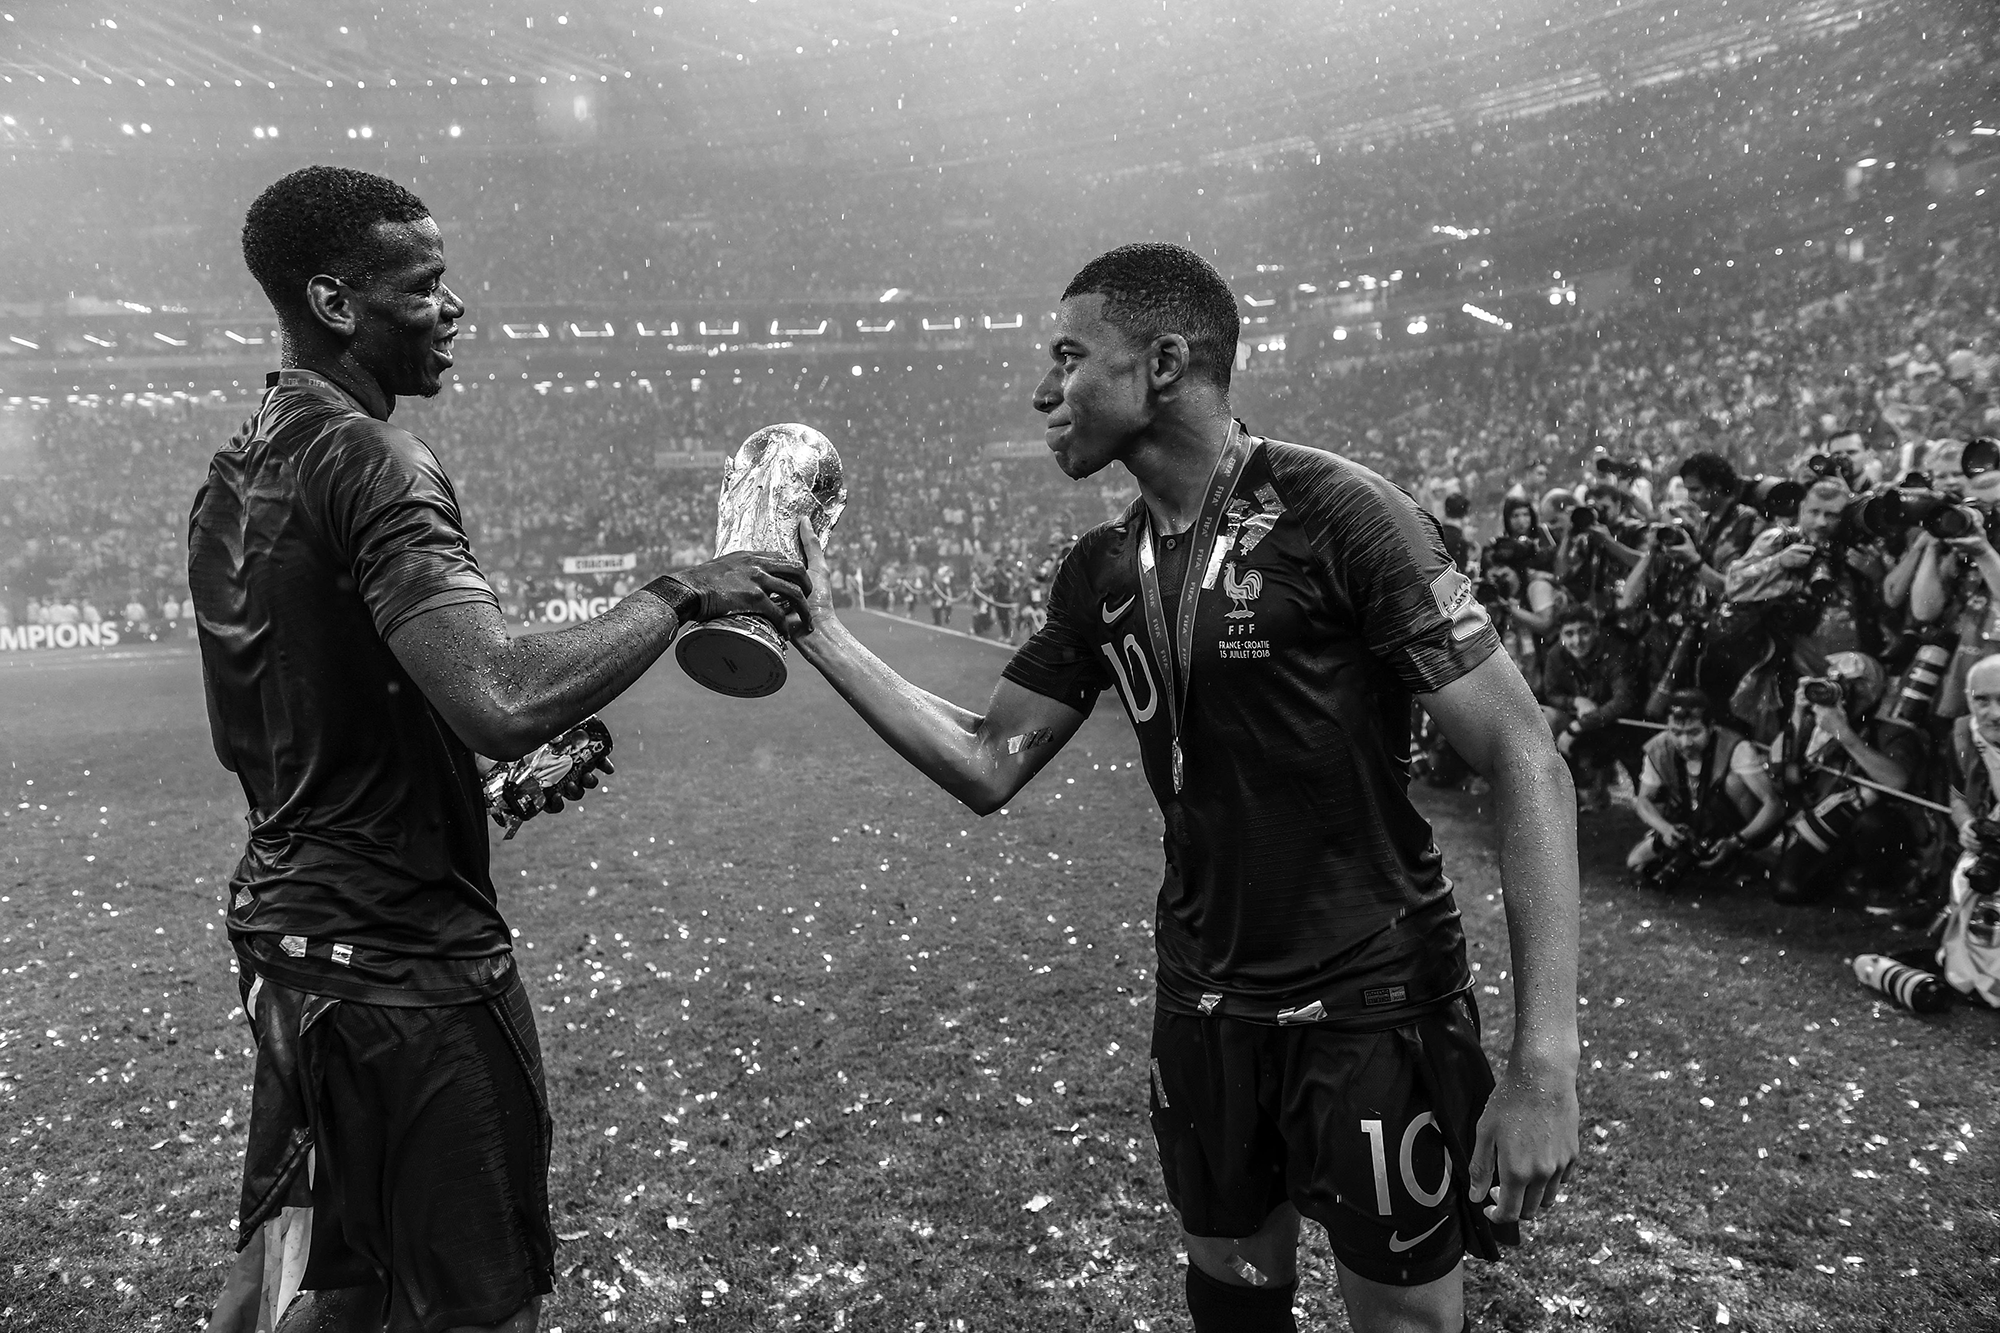 moscow, russia   july 15  editors note this image has been converted to black and white paul pogba l and kylian mbappe of france celebrate victory with the world cup trophy following his side victory in the 2018 fifa world cup russia final between france and croatia at luzhniki stadium on july 15, 2018 in moscow, russia  photo by david ramos   fifafifa via getty images